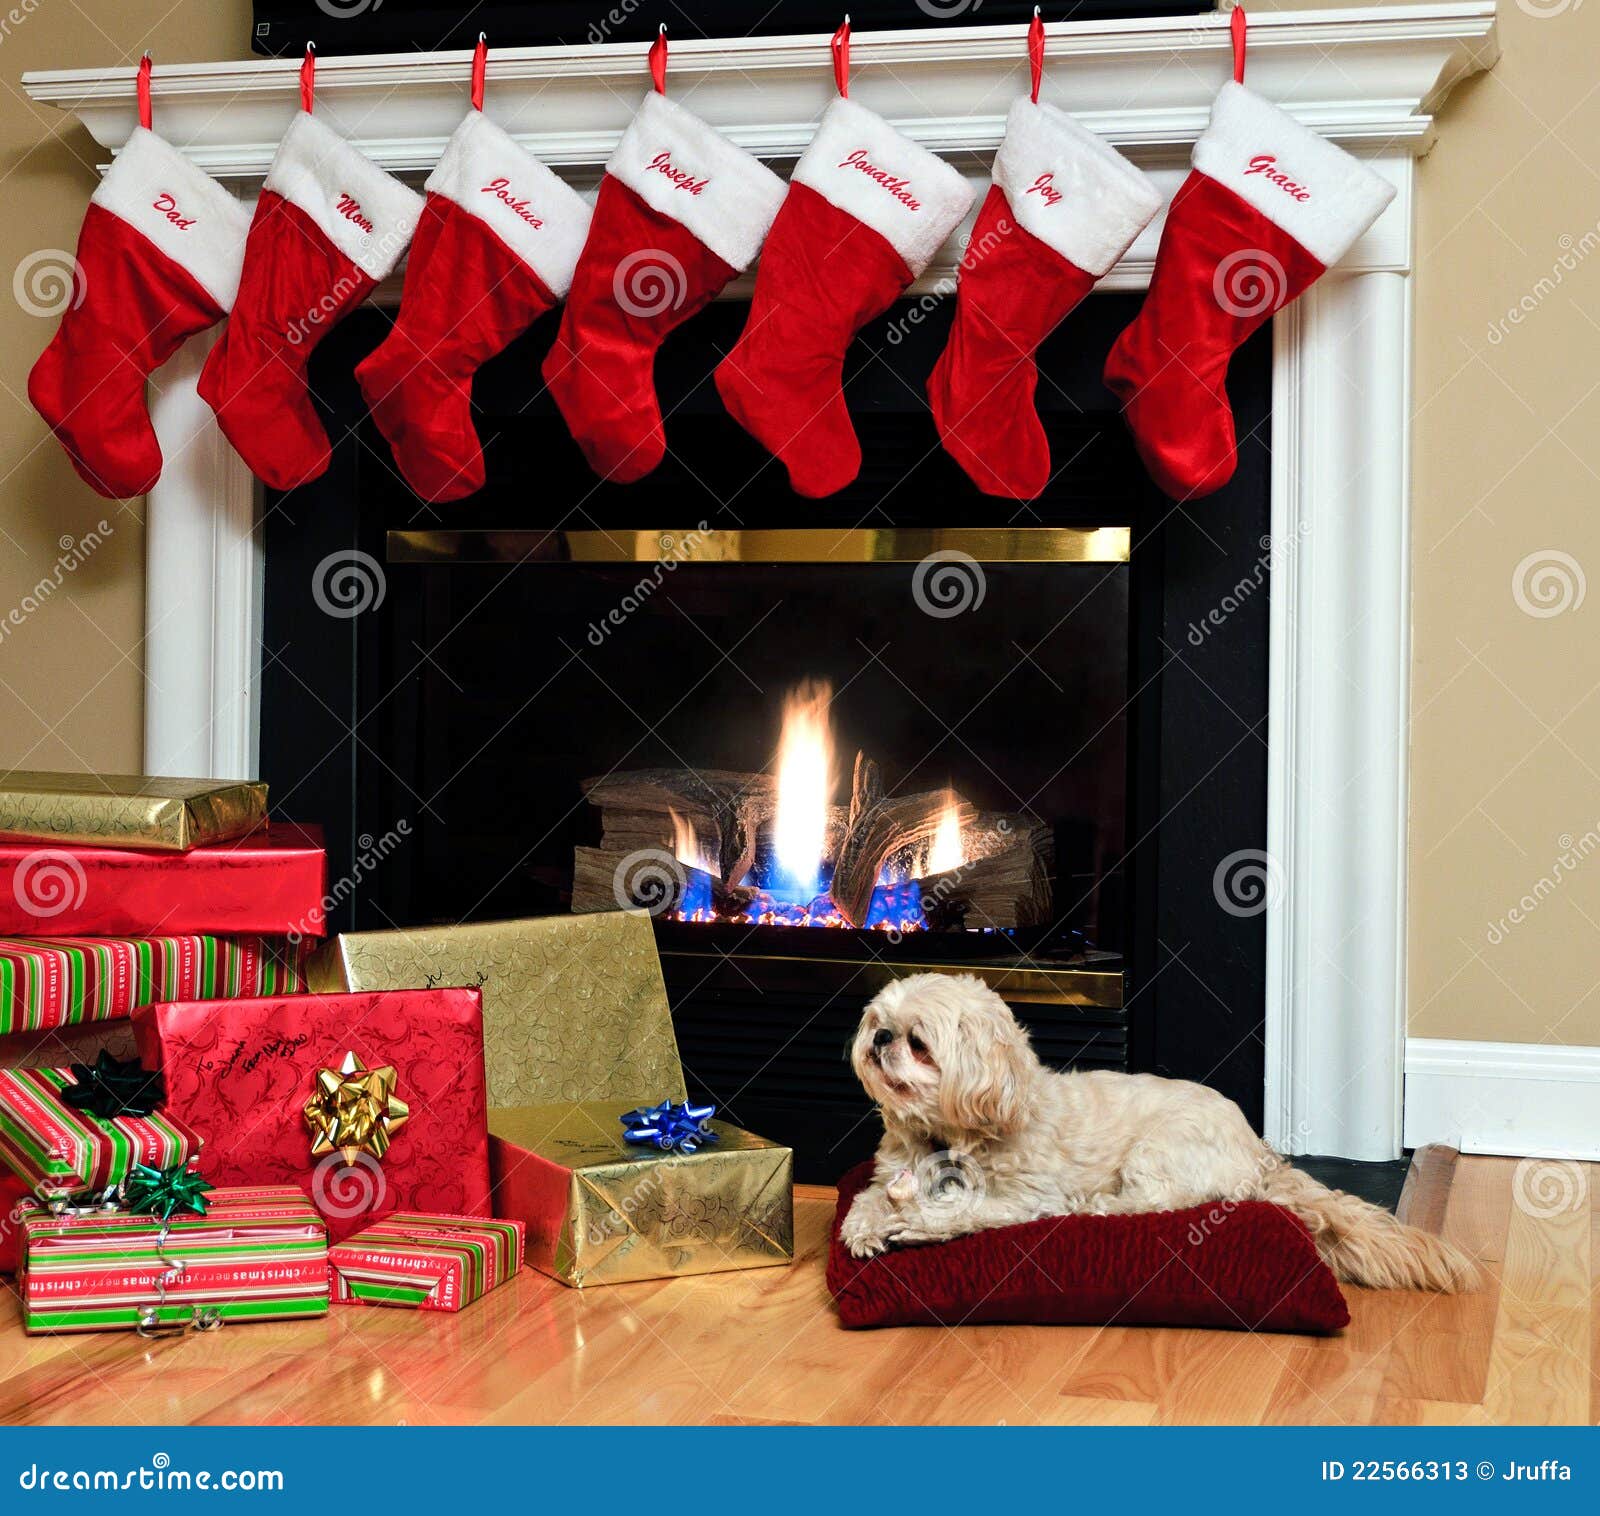 Christmas Fireplace With Stockings 2